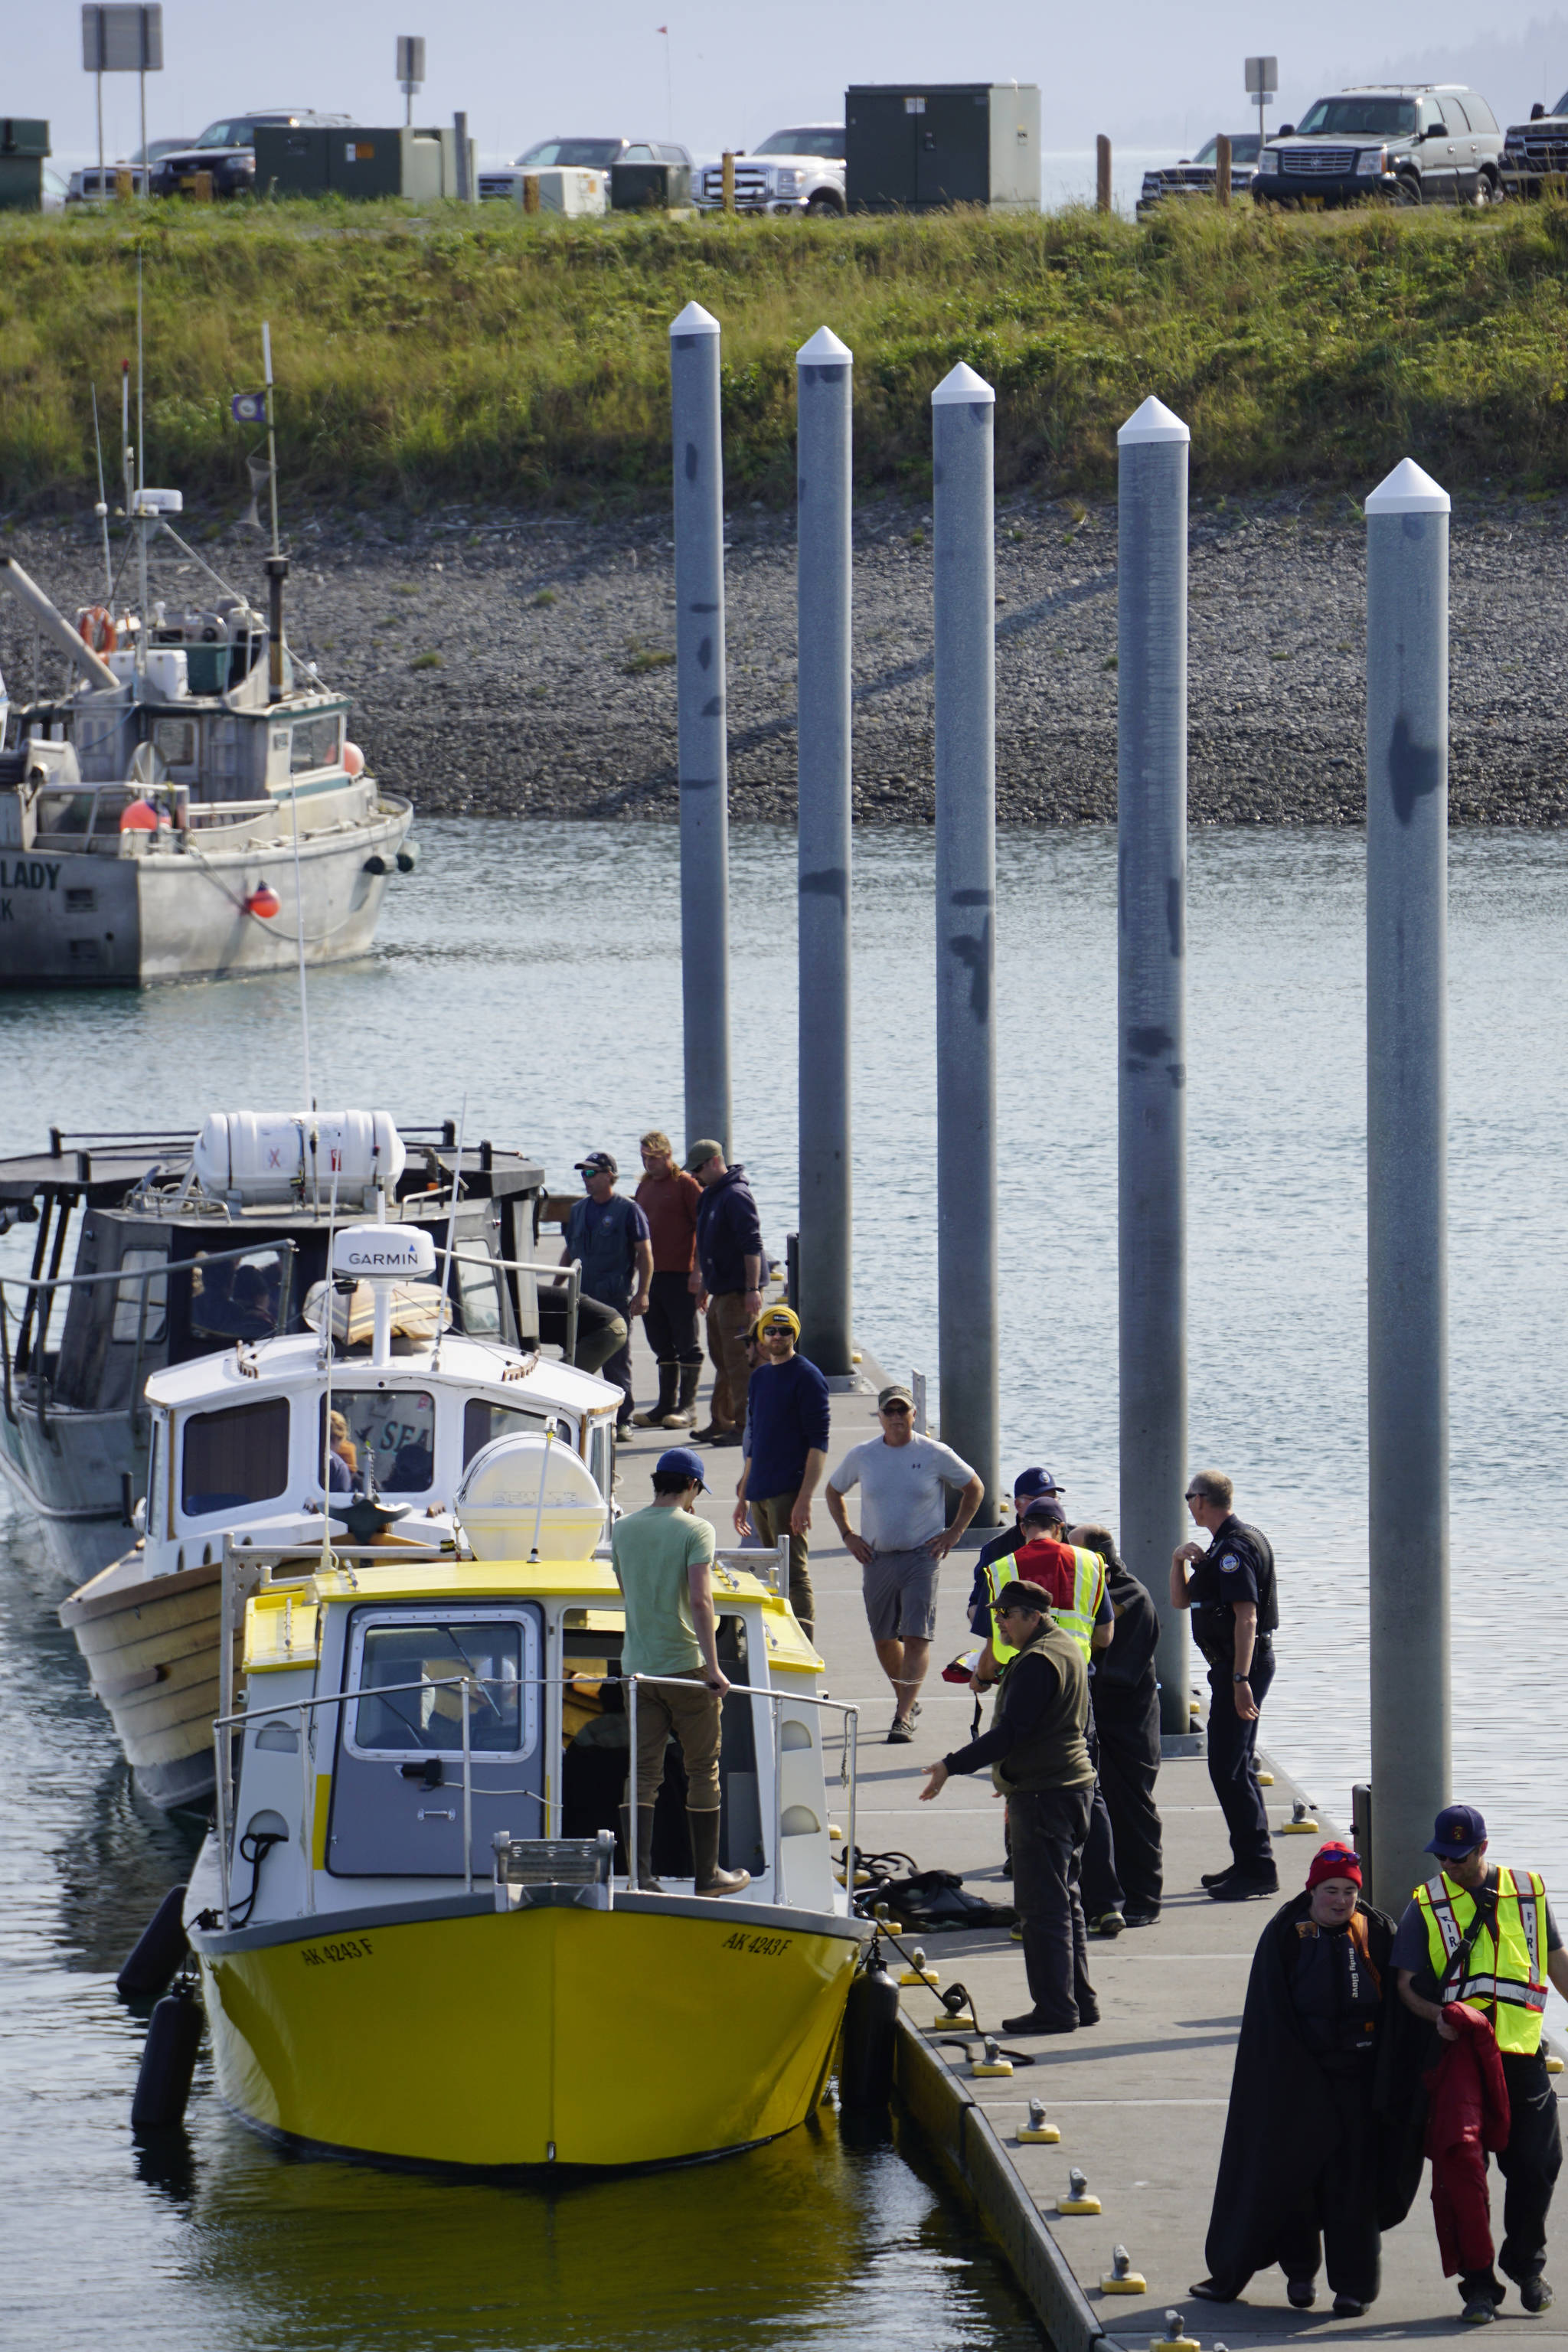 Emergency medical technicians help victims of a boat capsizing up the Homer Harbor load and launch ramp on Tuesday afternoon, July 30, 2019, in Homer, Alaska. Crews in three Good Samaritan boats, from front to back, the Torega, the Grotta Nove, and the Seabird, rescued five people from an overturned skiff near China Poot Bay. (Photo by Michael Armstrong/Homer News)